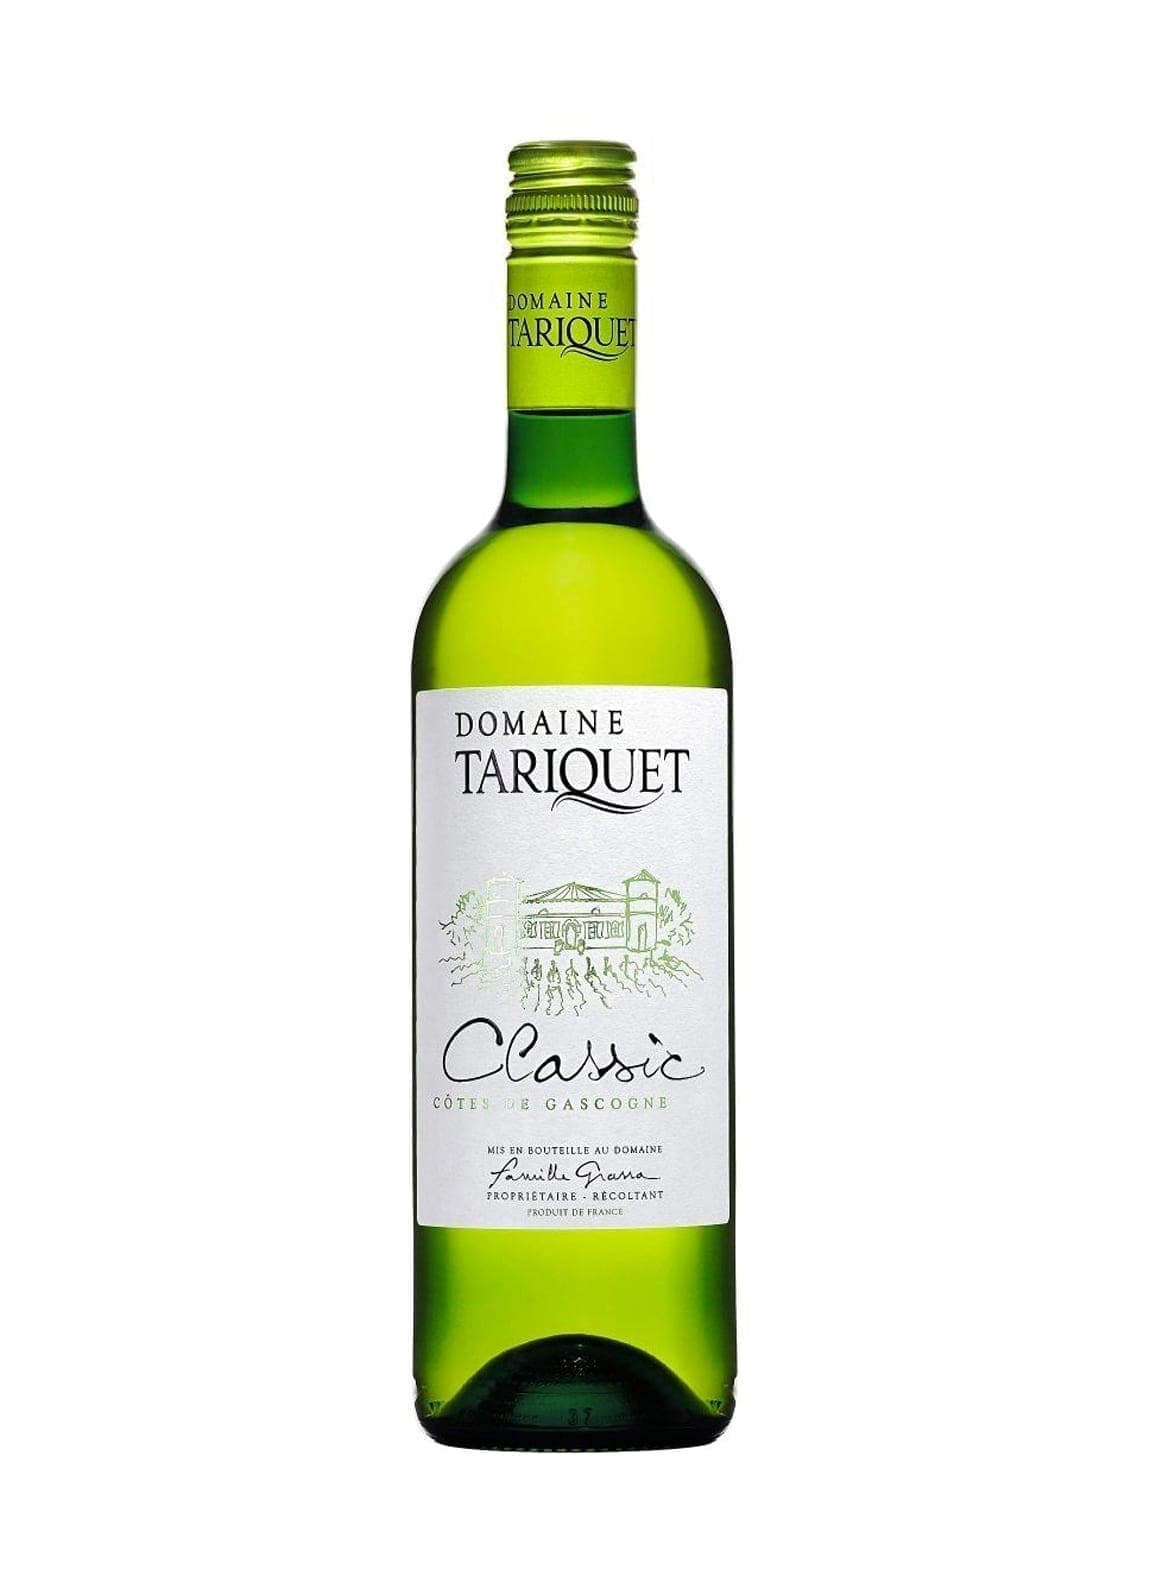 Domaine Tariquet White Wine Classic 10.5% 750ml | Wine | Shop online at Spirits of France